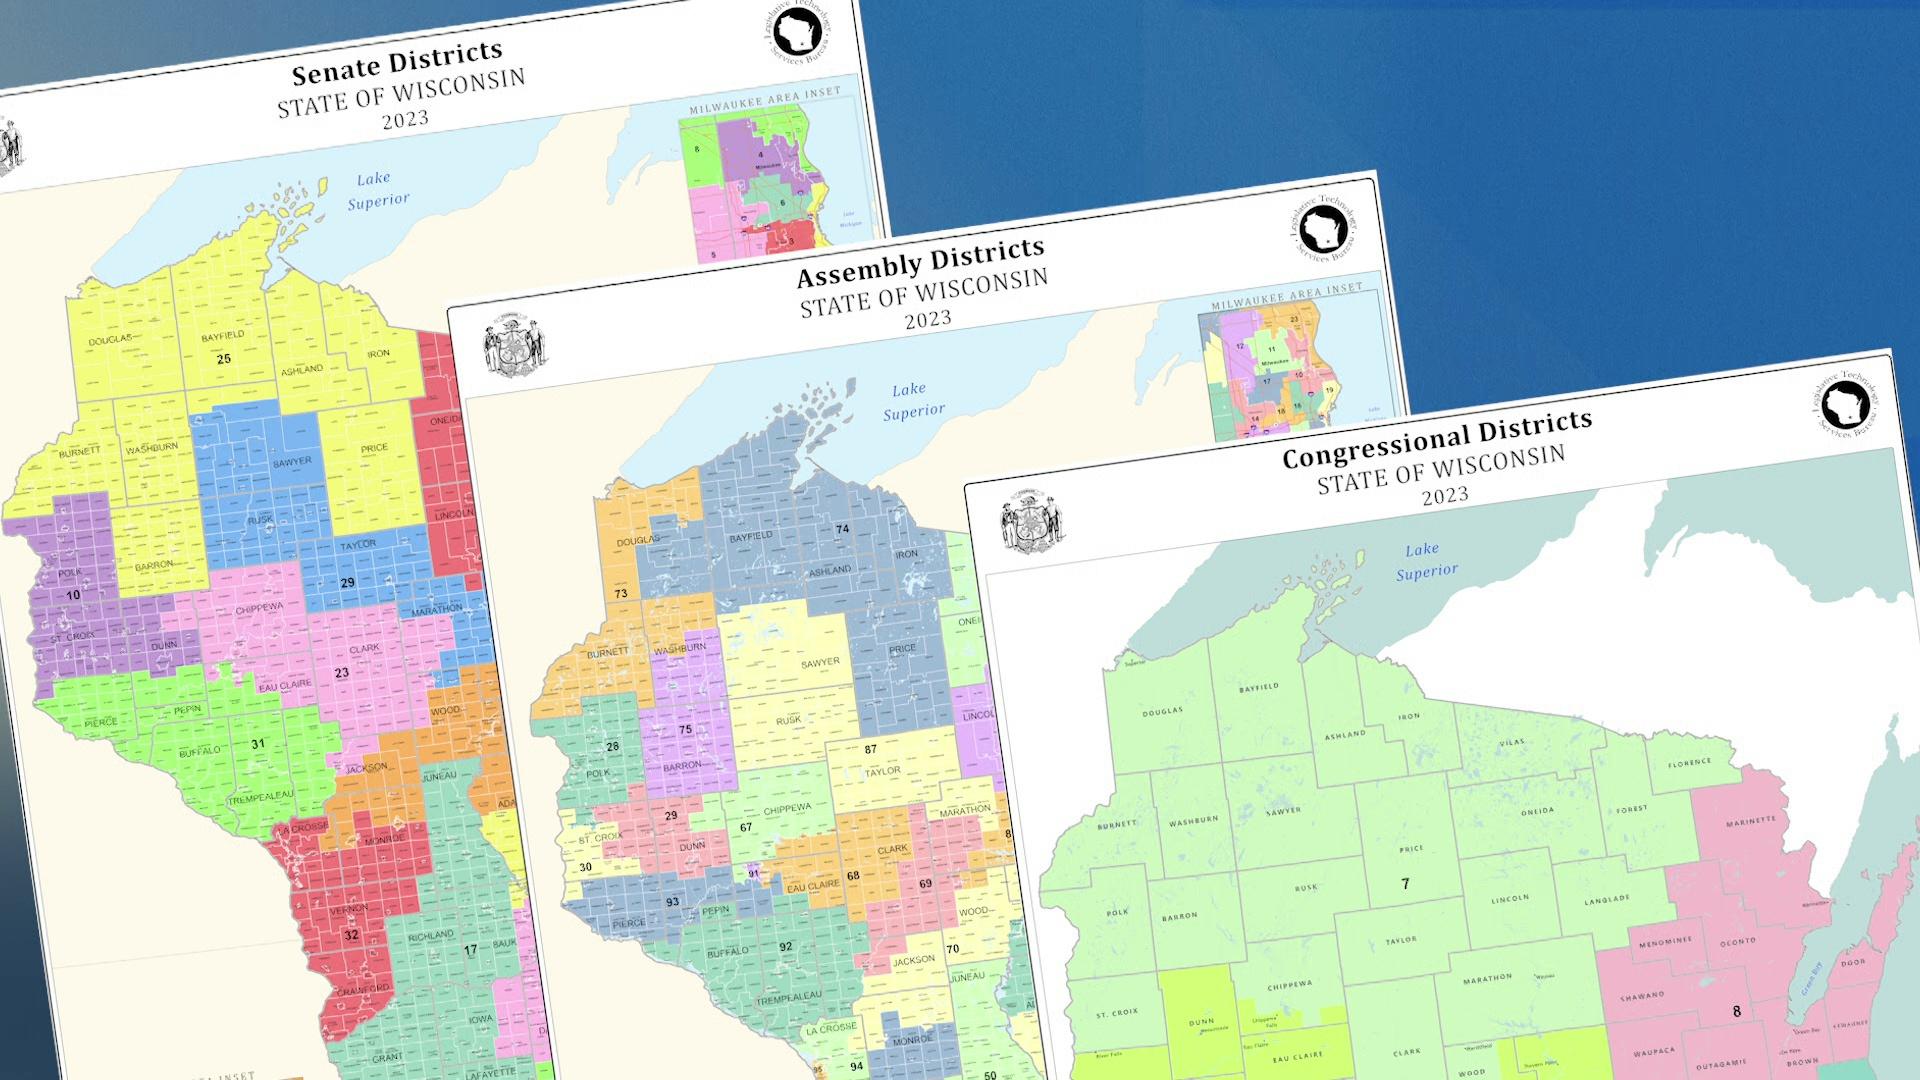 A graphic shows three overlapping maps of Wisconsin depicting the state's 2023 Senate, Assembly, and congressional districts.